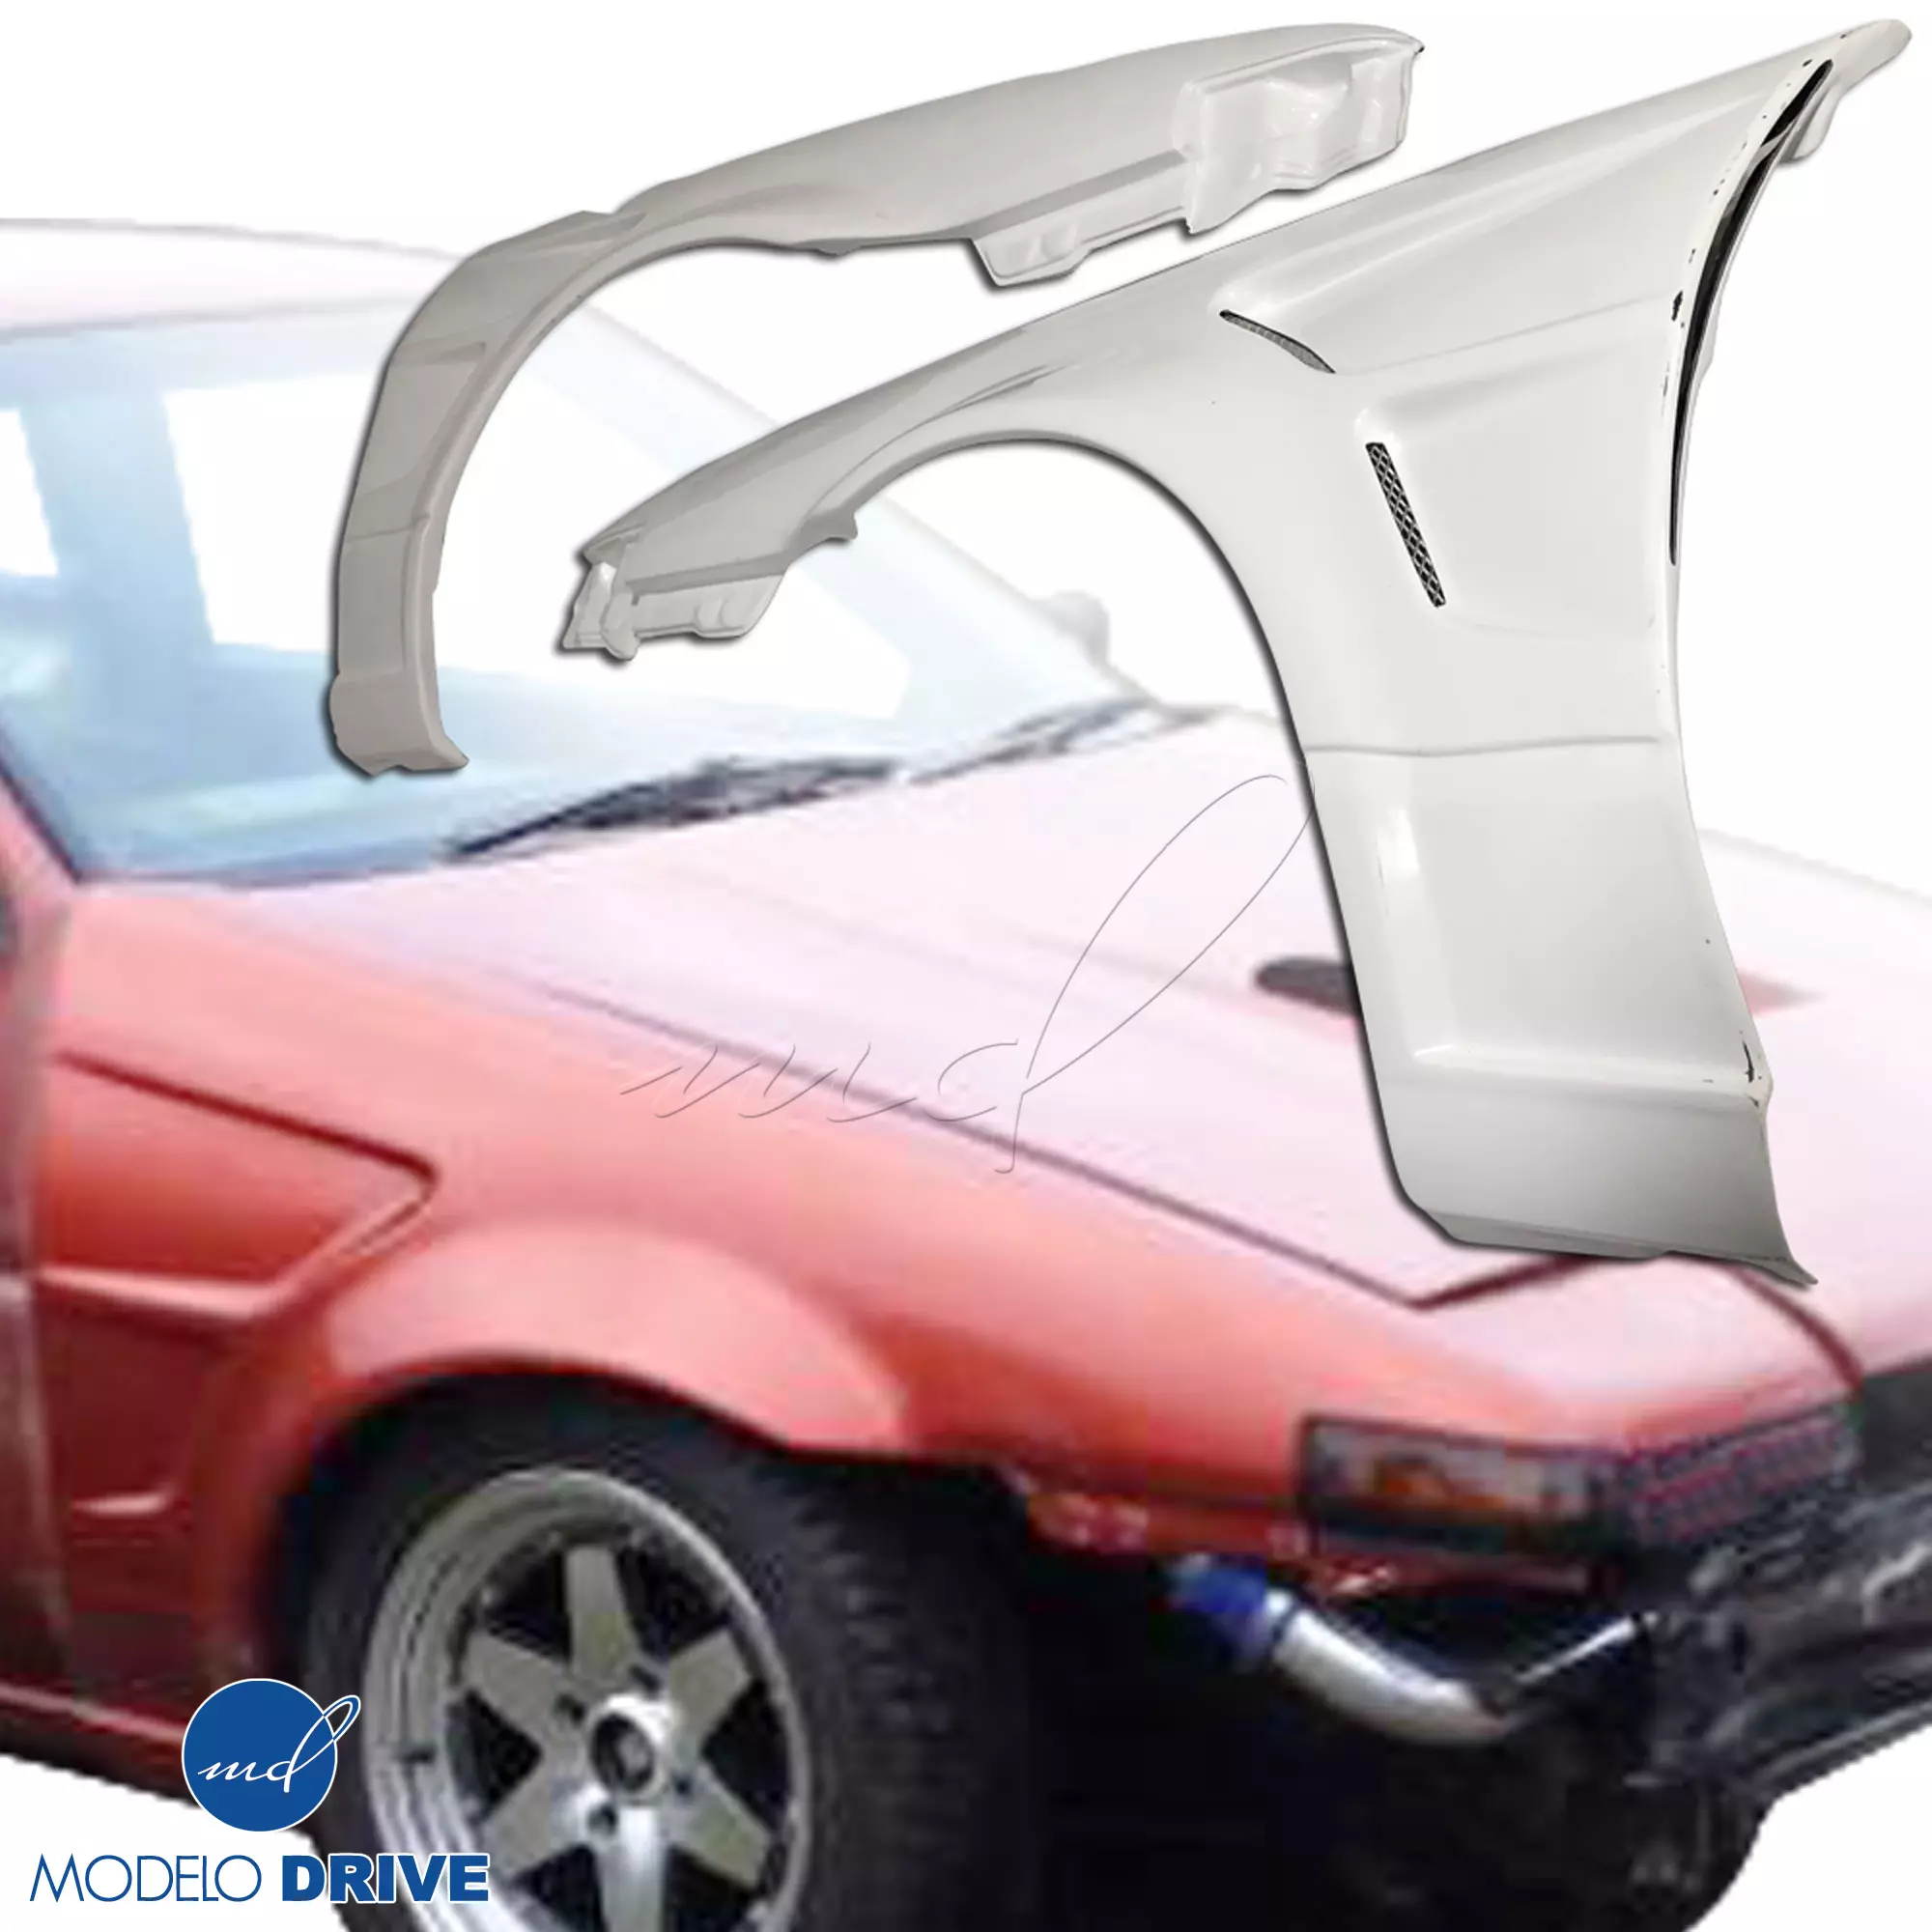 ModeloDrive FRP DMA D1 Wide Body 30mm Fenders Set > Toyota Corolla AE86 1984-1987 > 2dr Coupe - Image 11